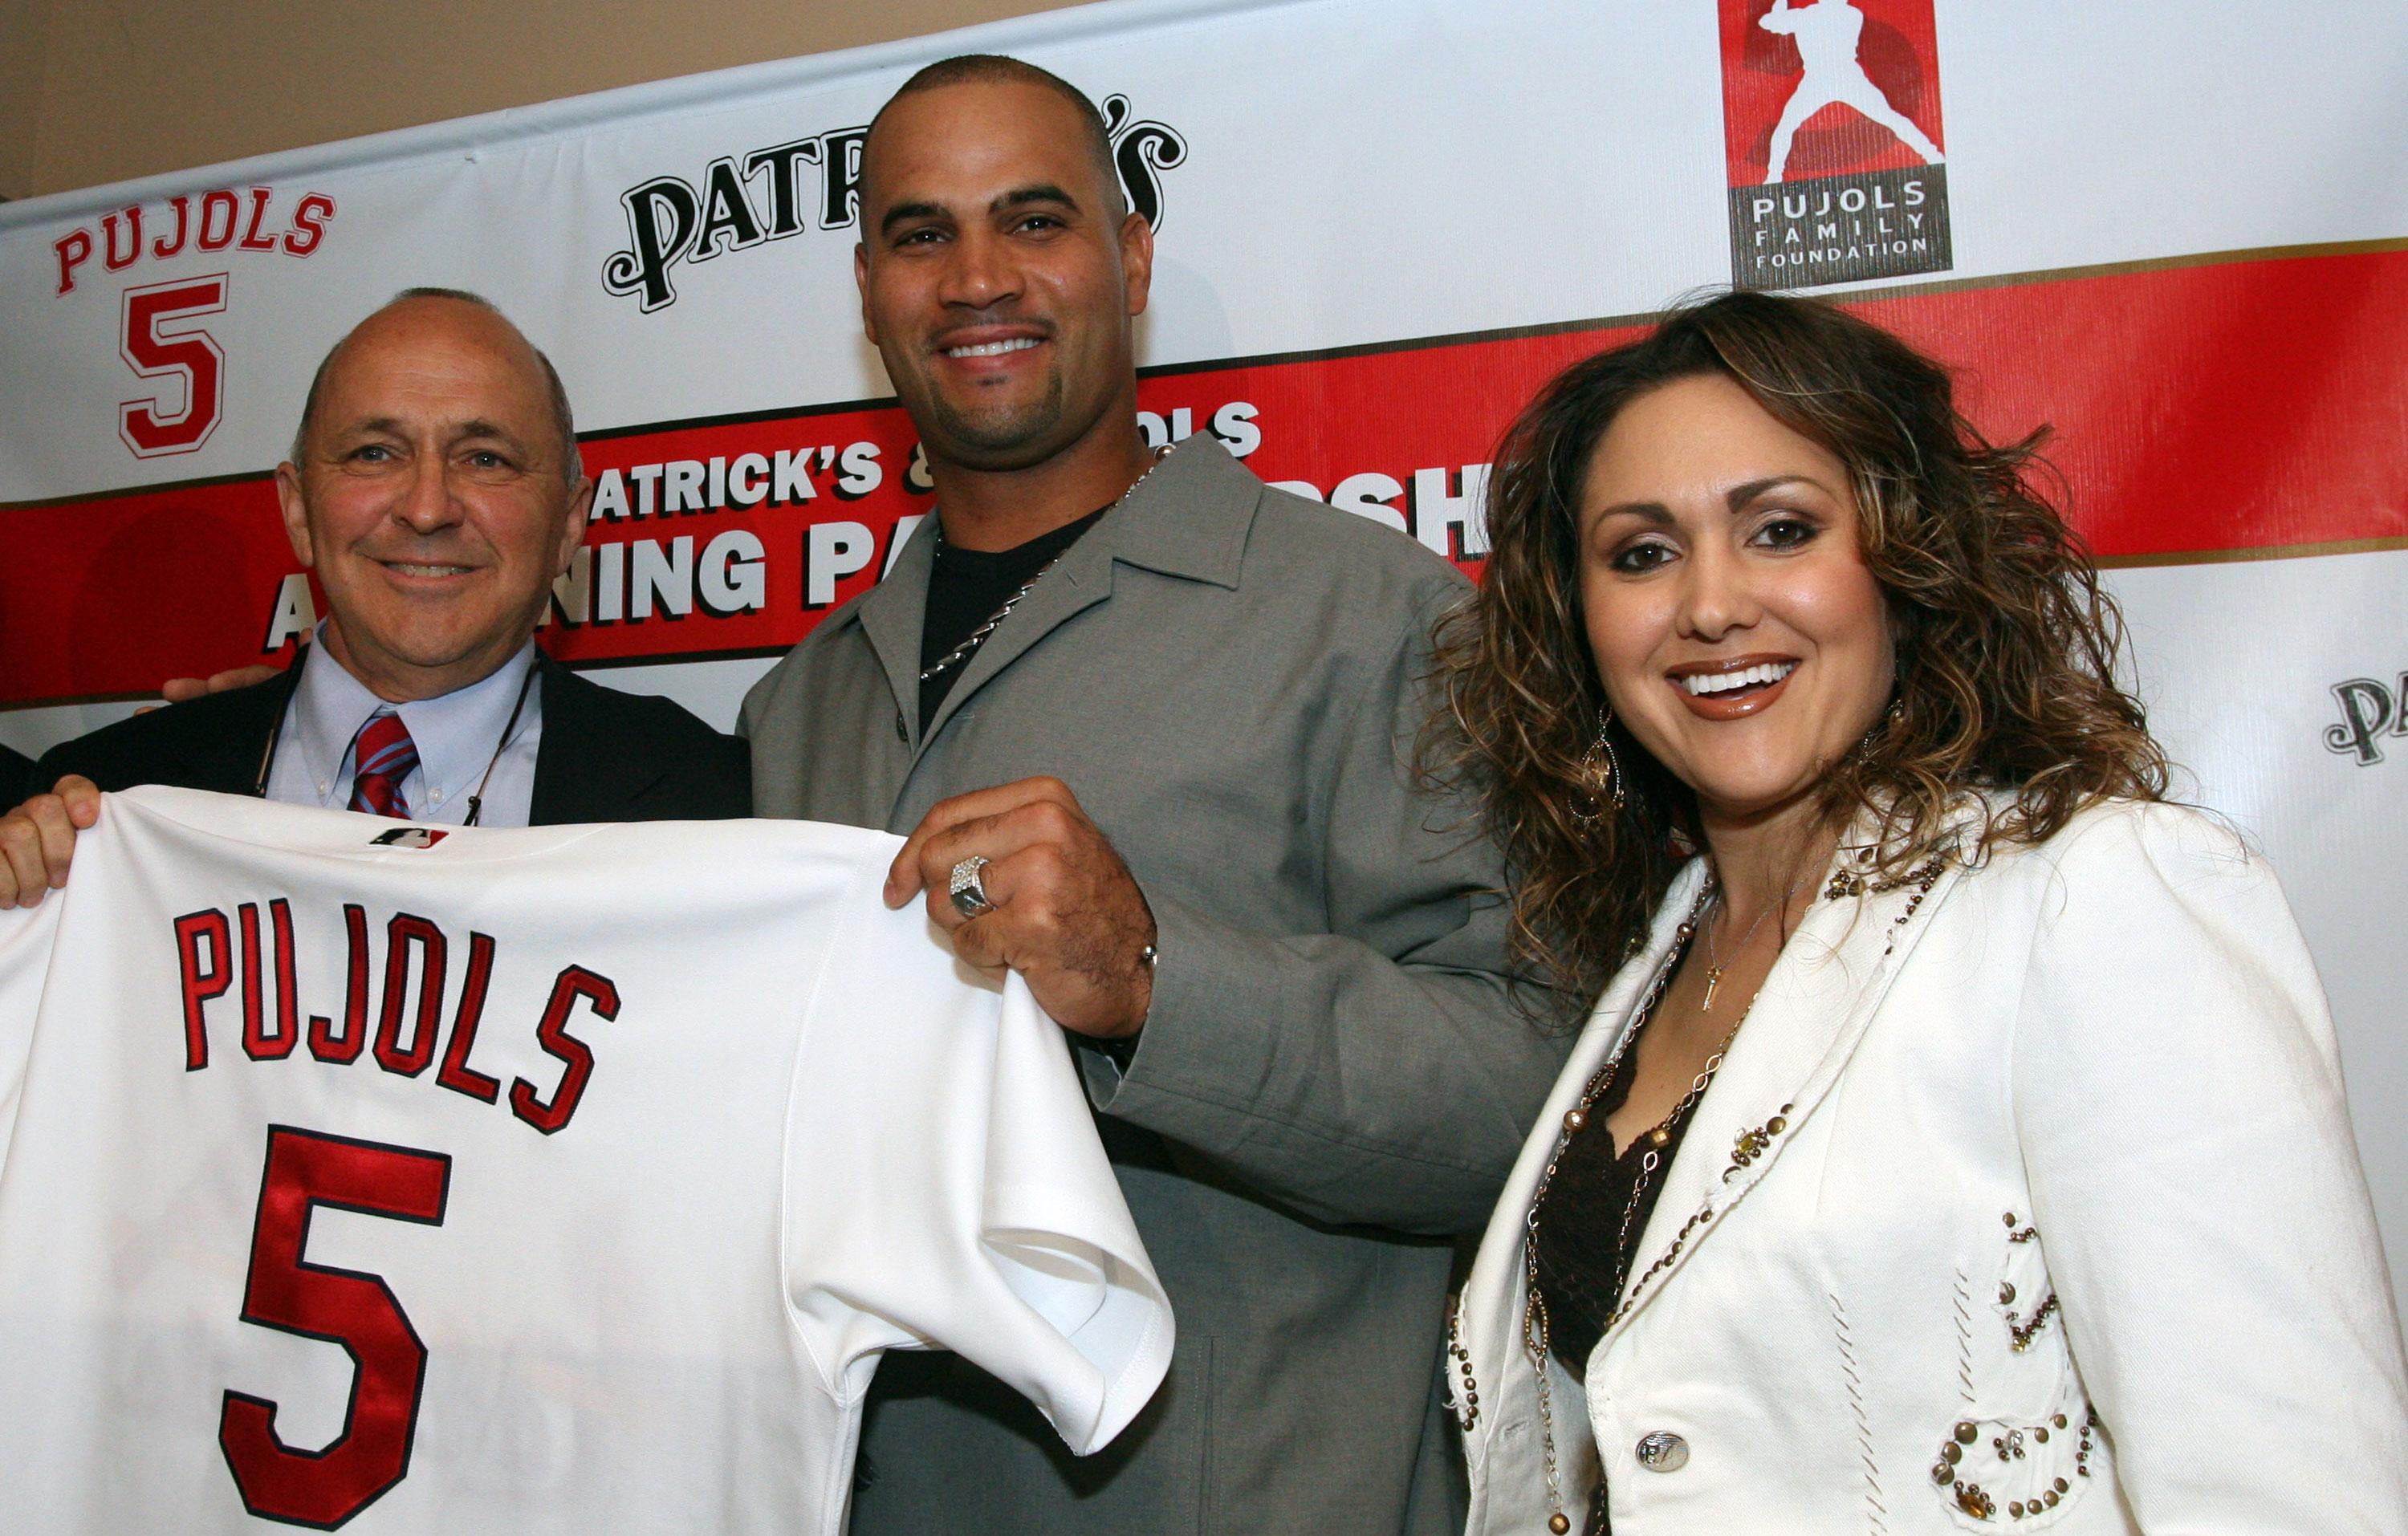 Deidre Pujols shares who she will be rooting for after divorce news